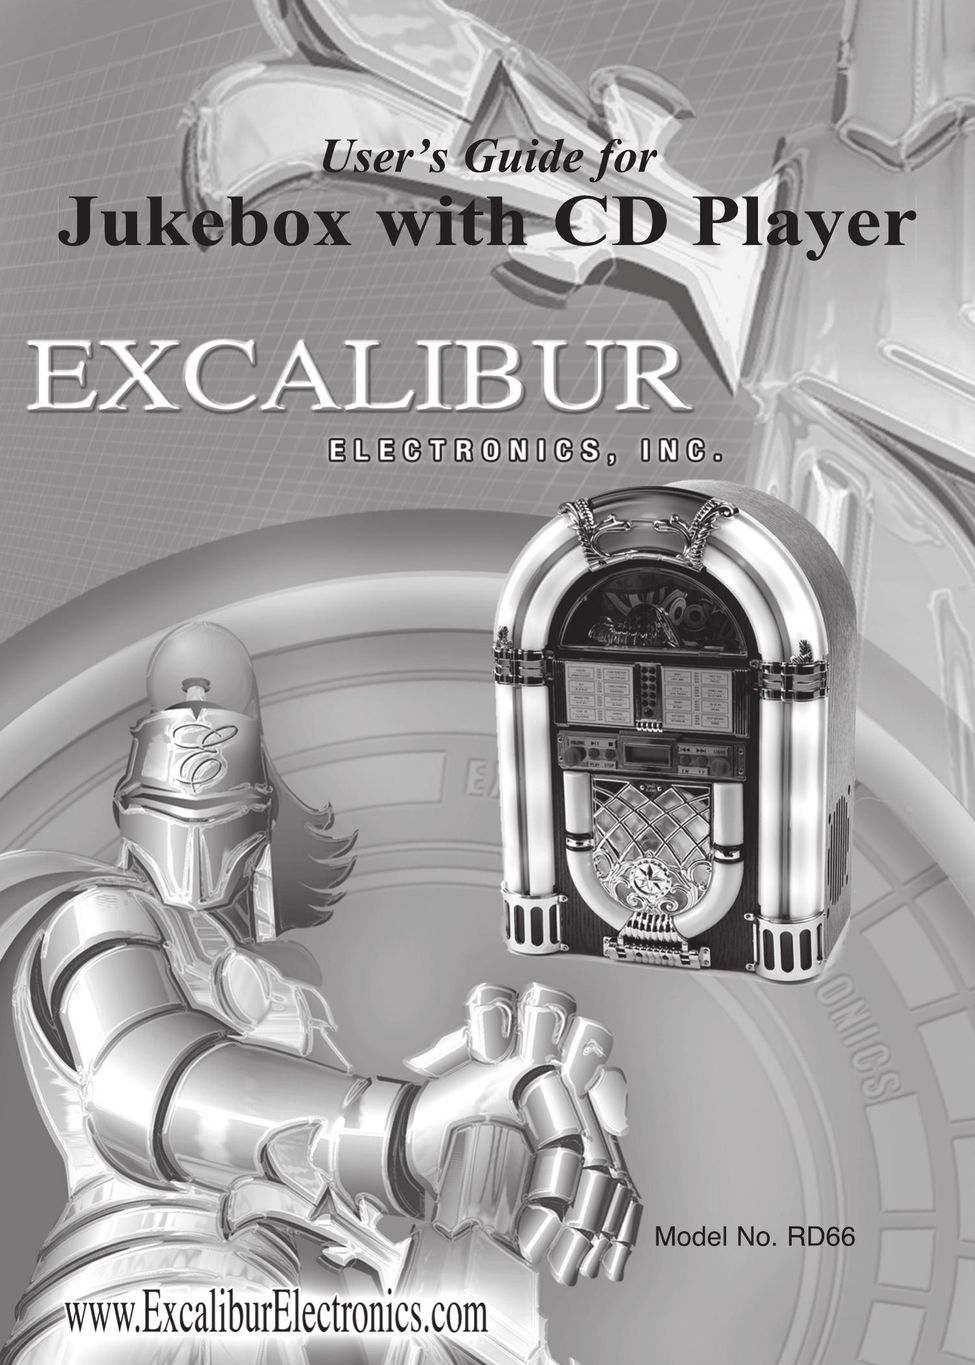 Excalibur electronic RD66 MP3 Player User Manual